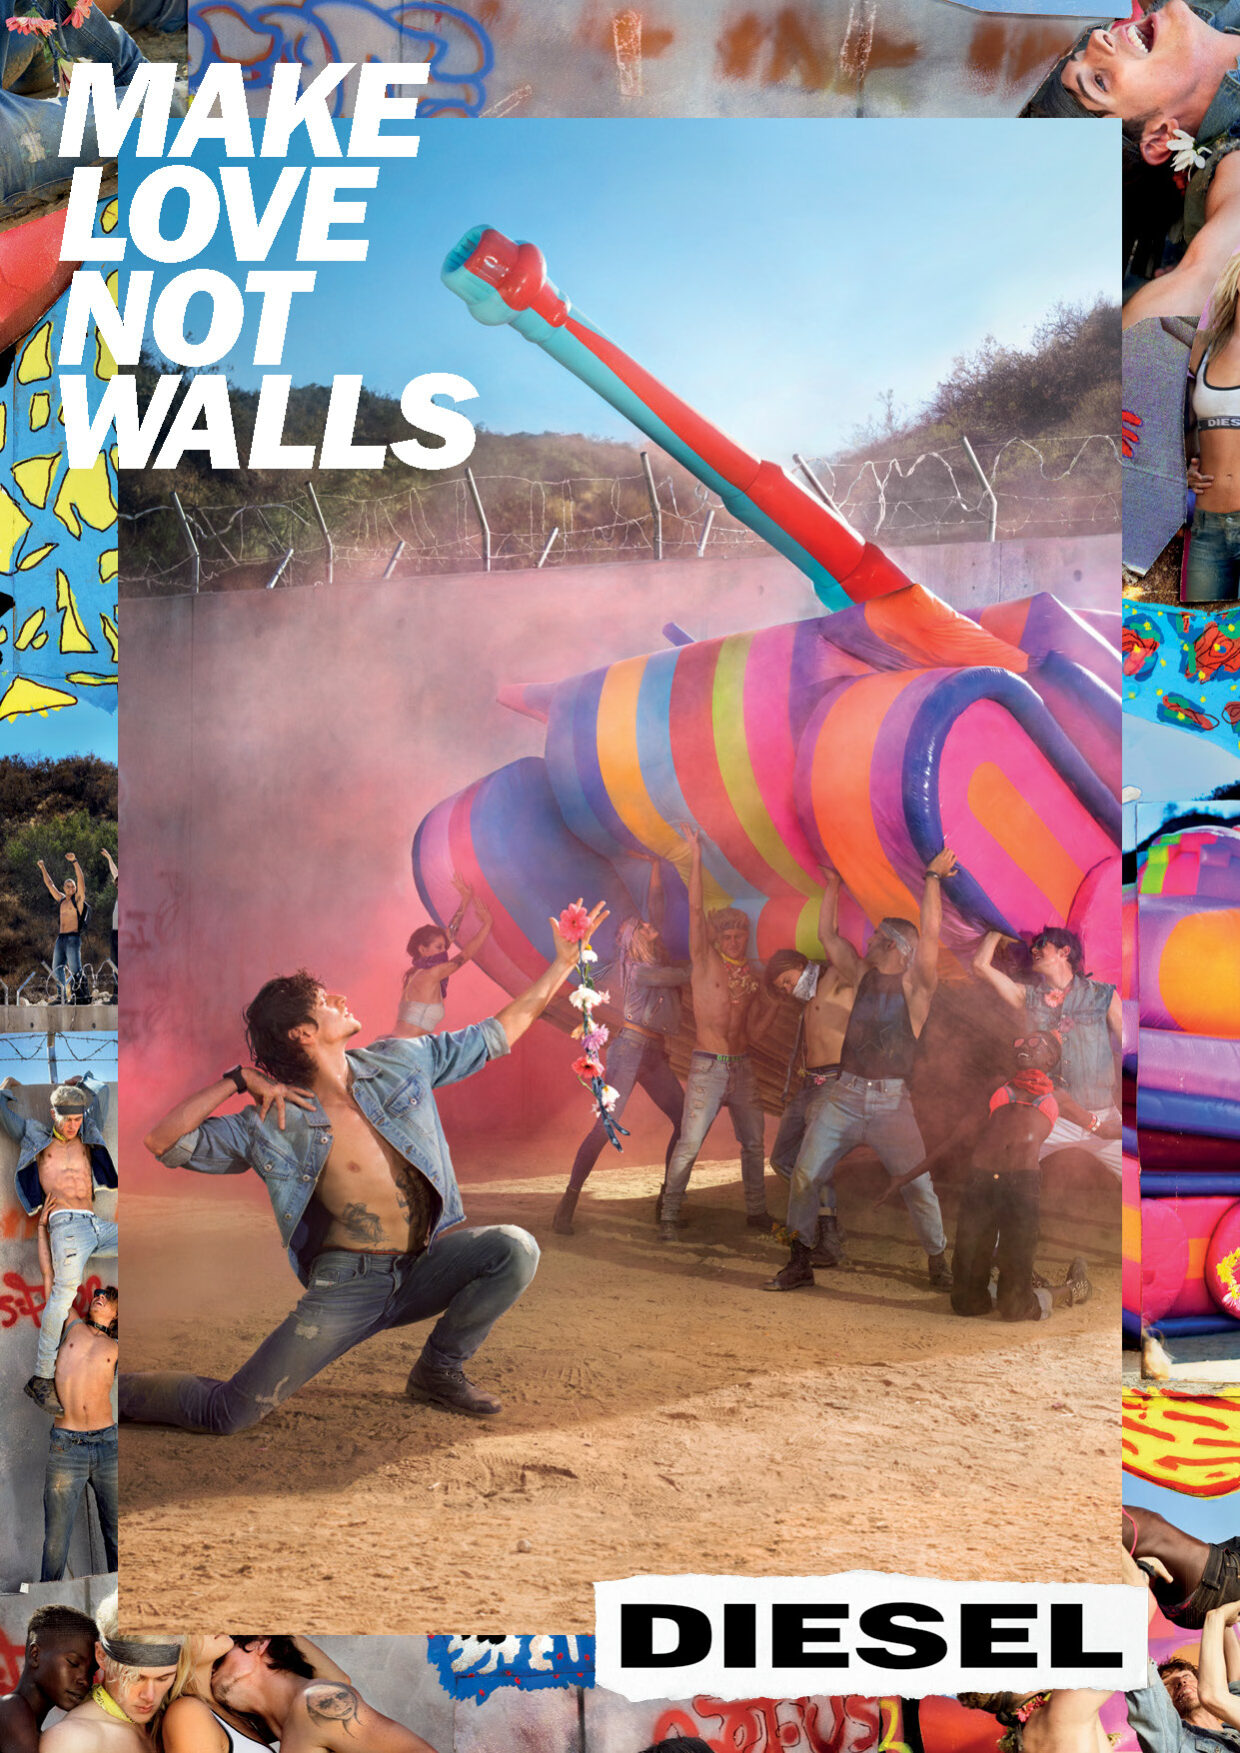 Diesel: “Make Love Not Walls” Photography and film by David LaChapelle. | 5